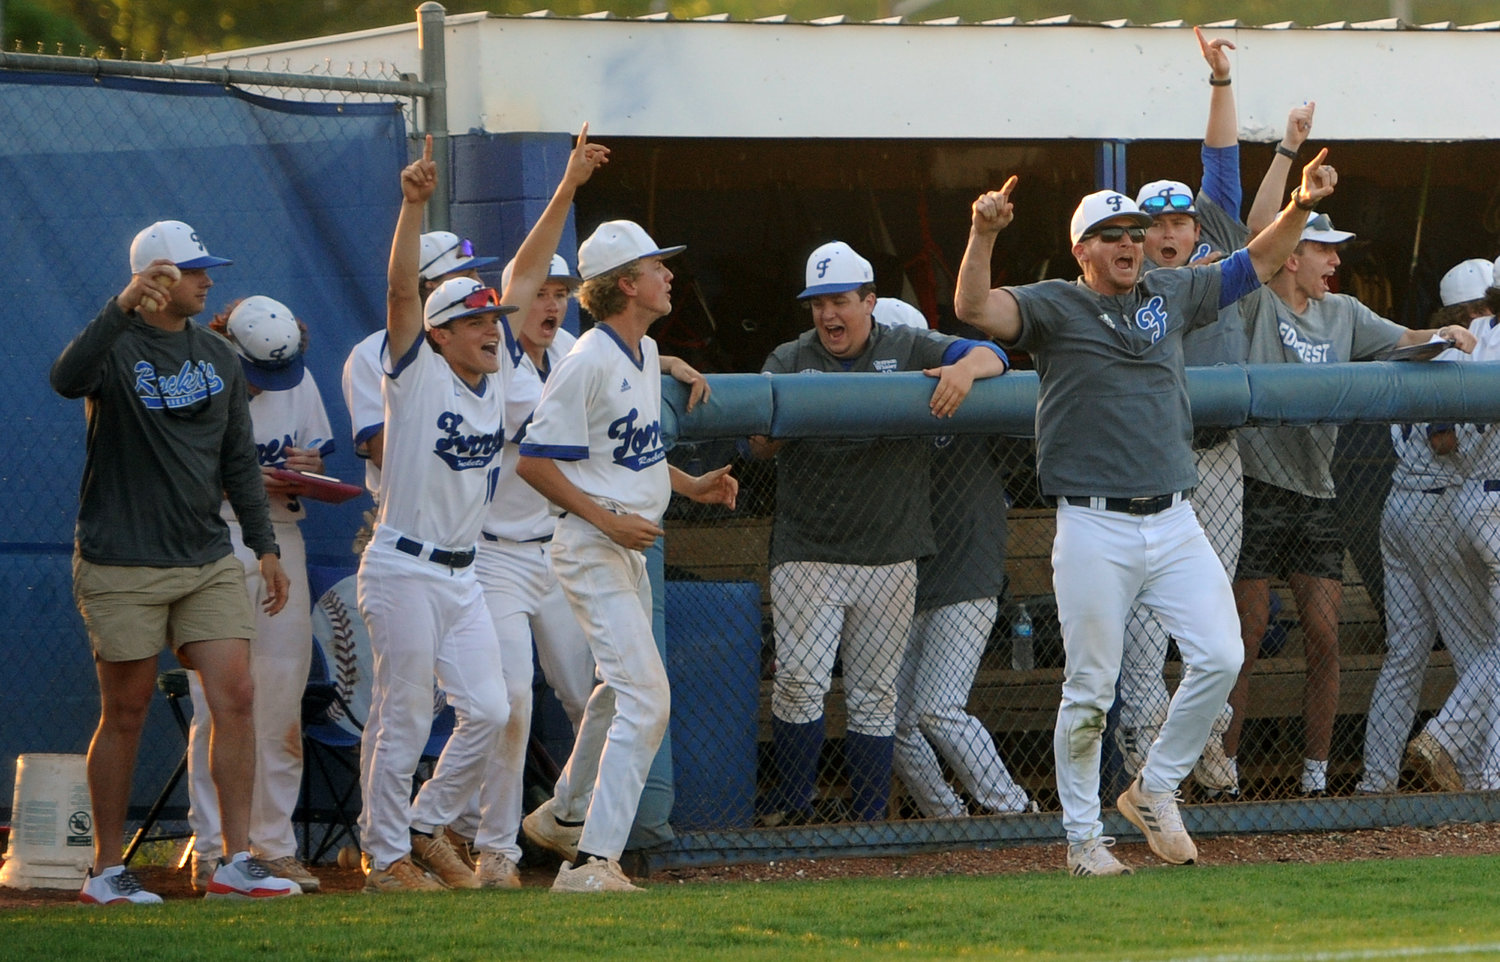 The Rocket dugout erupts after recording the final out and securing the district championship.